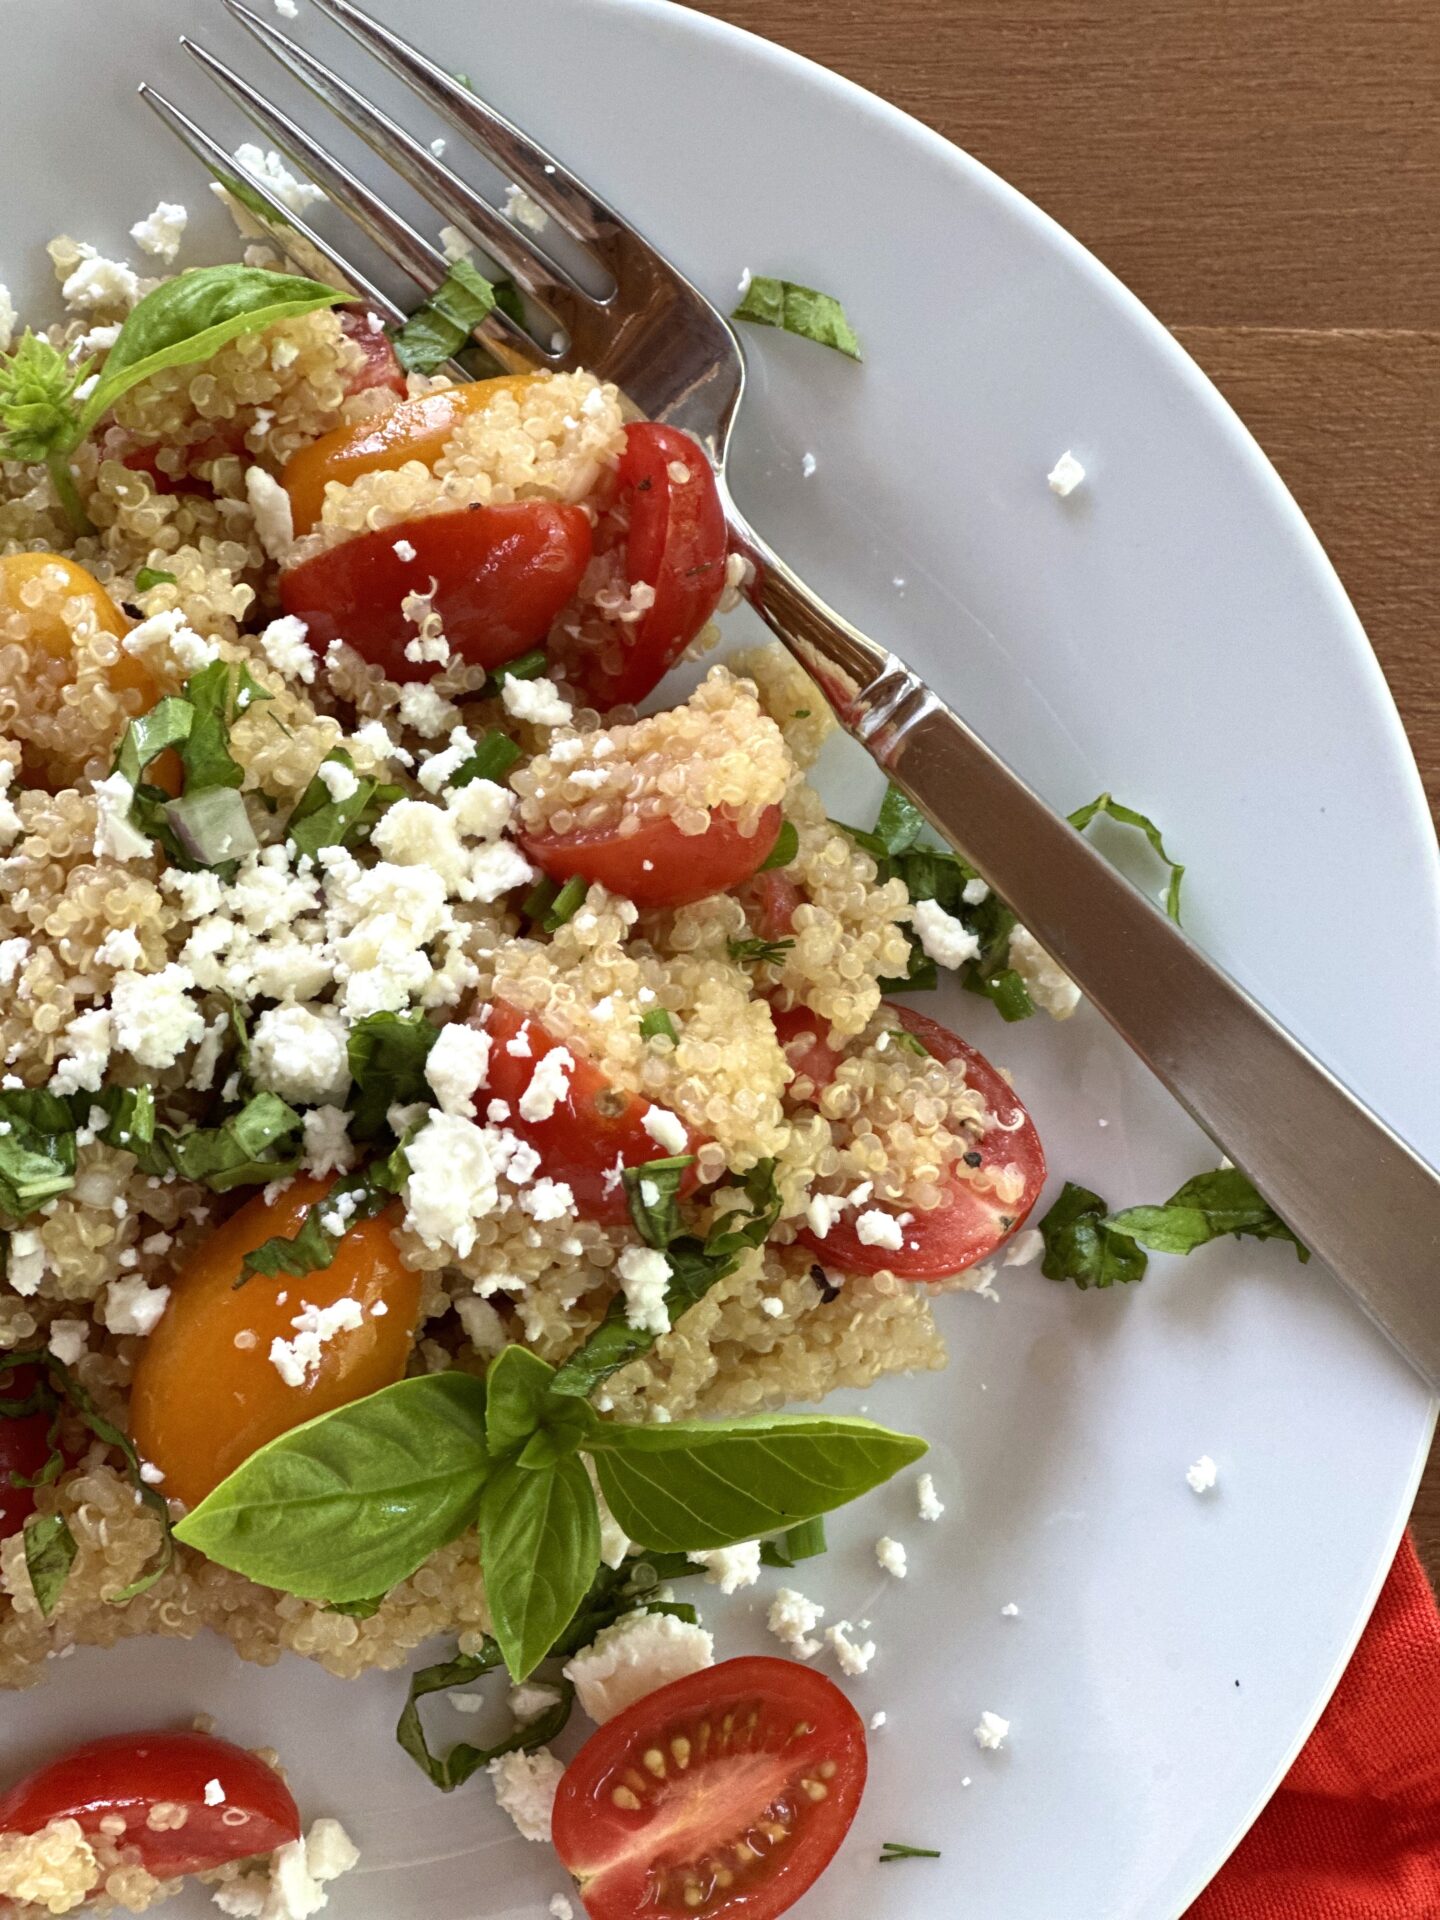 A close up image of cherry tomato quinoa salad garnished with crumbled feta cheese and fresh basil